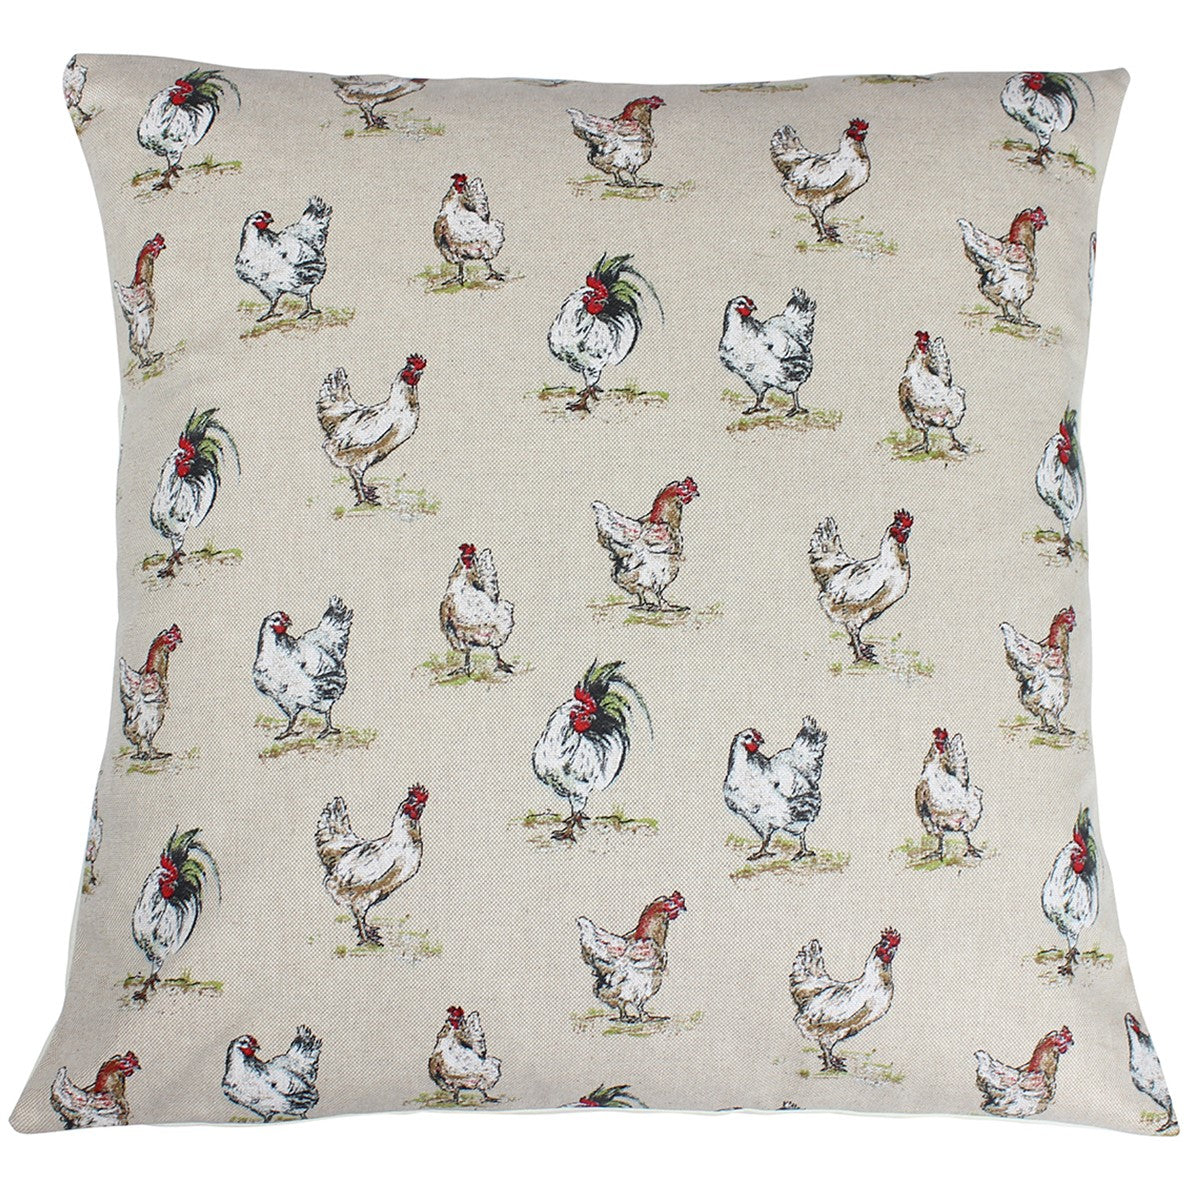 Chickens Country Animal Cushion